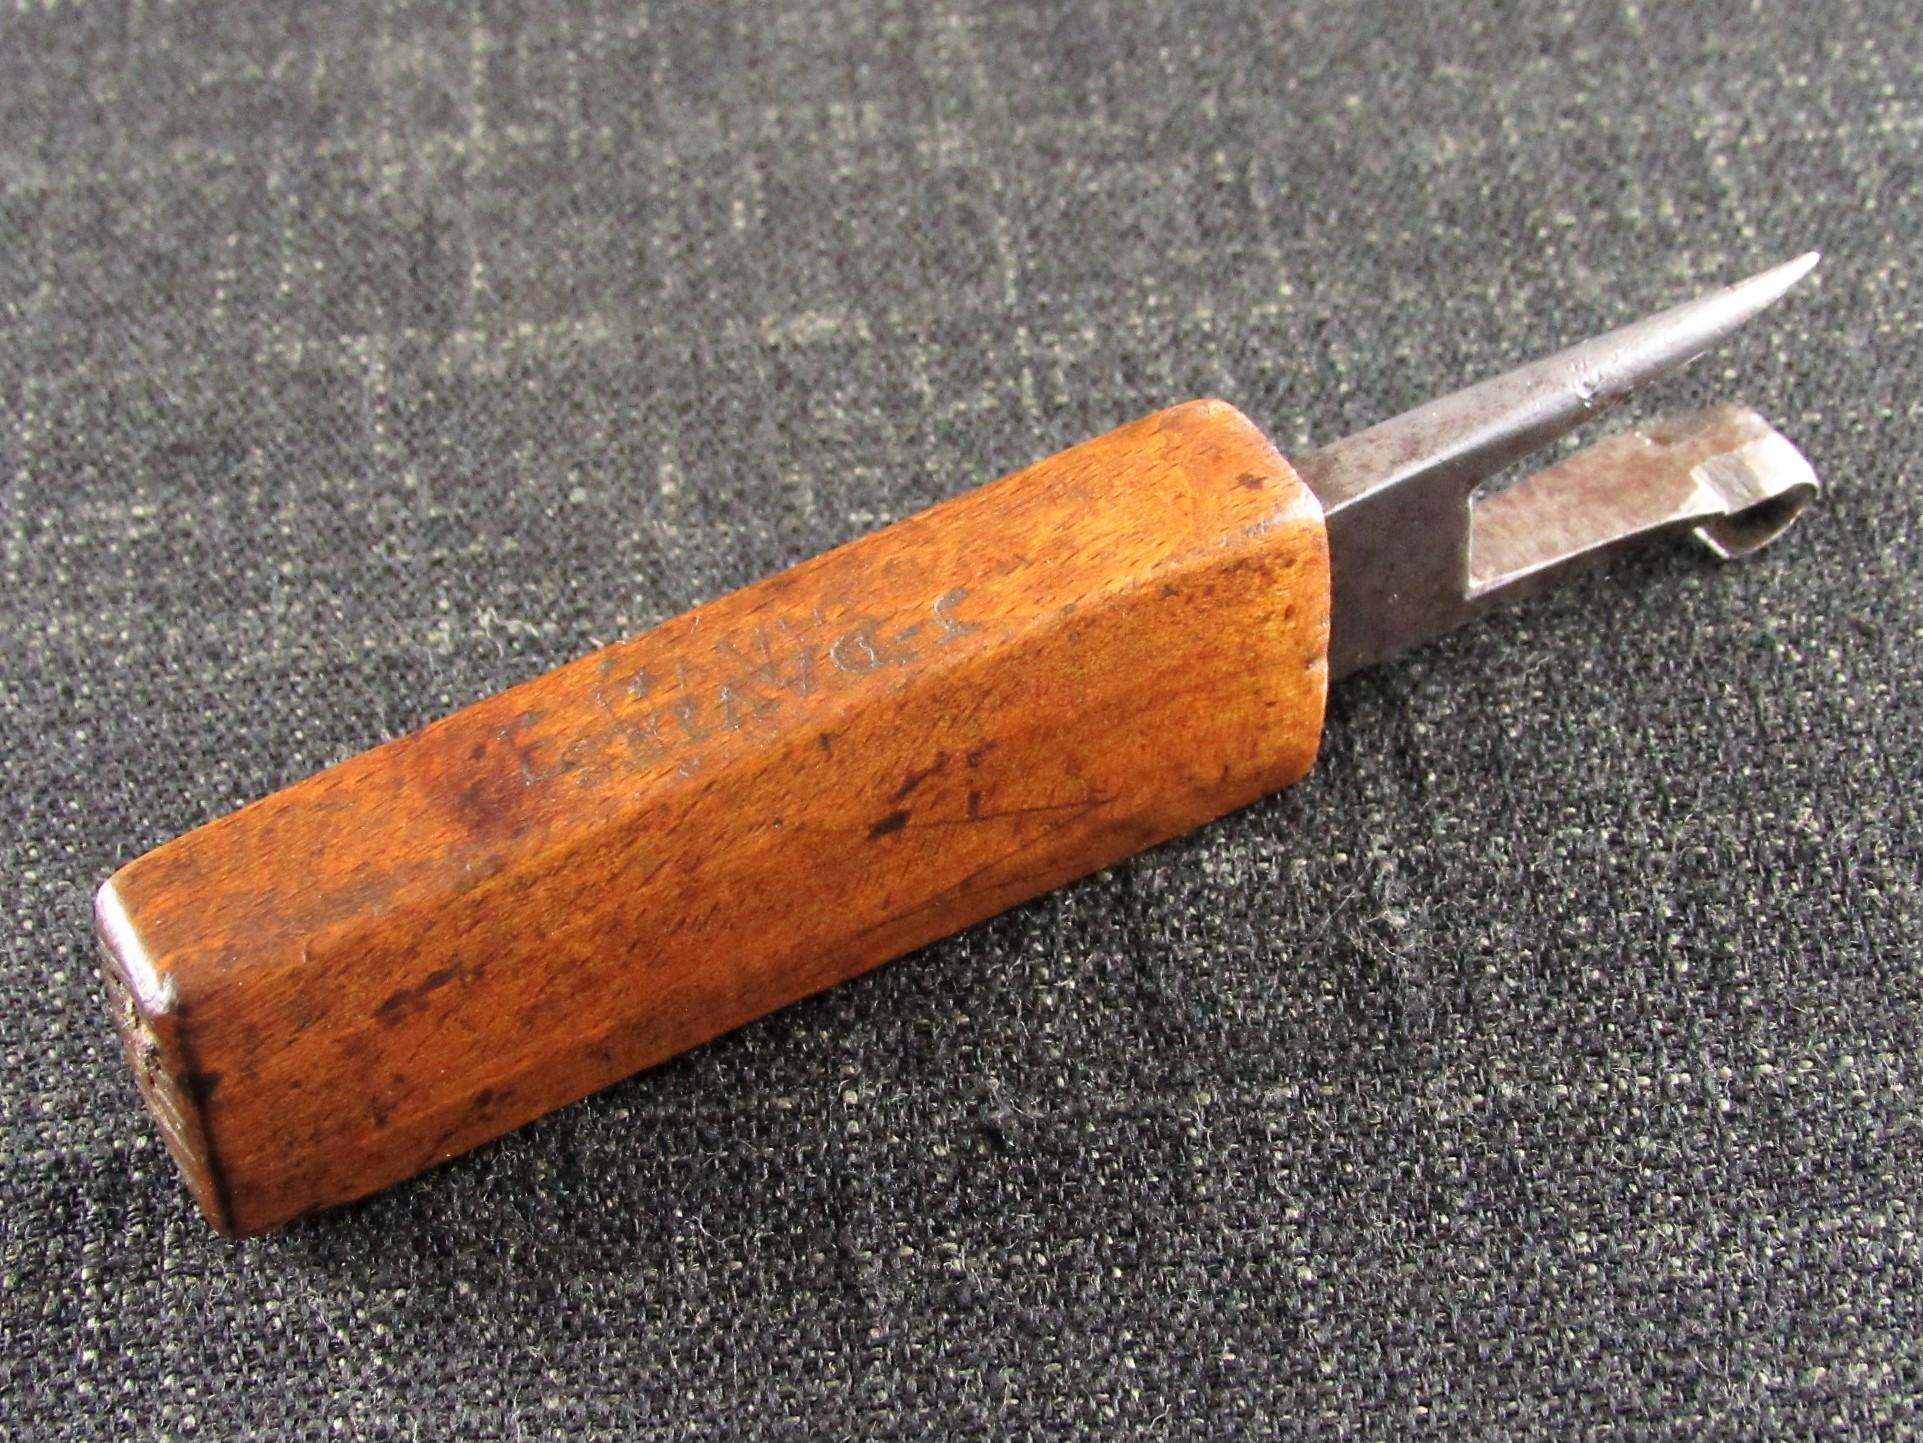 Wooden Handled Timber Scribe or Race Knife